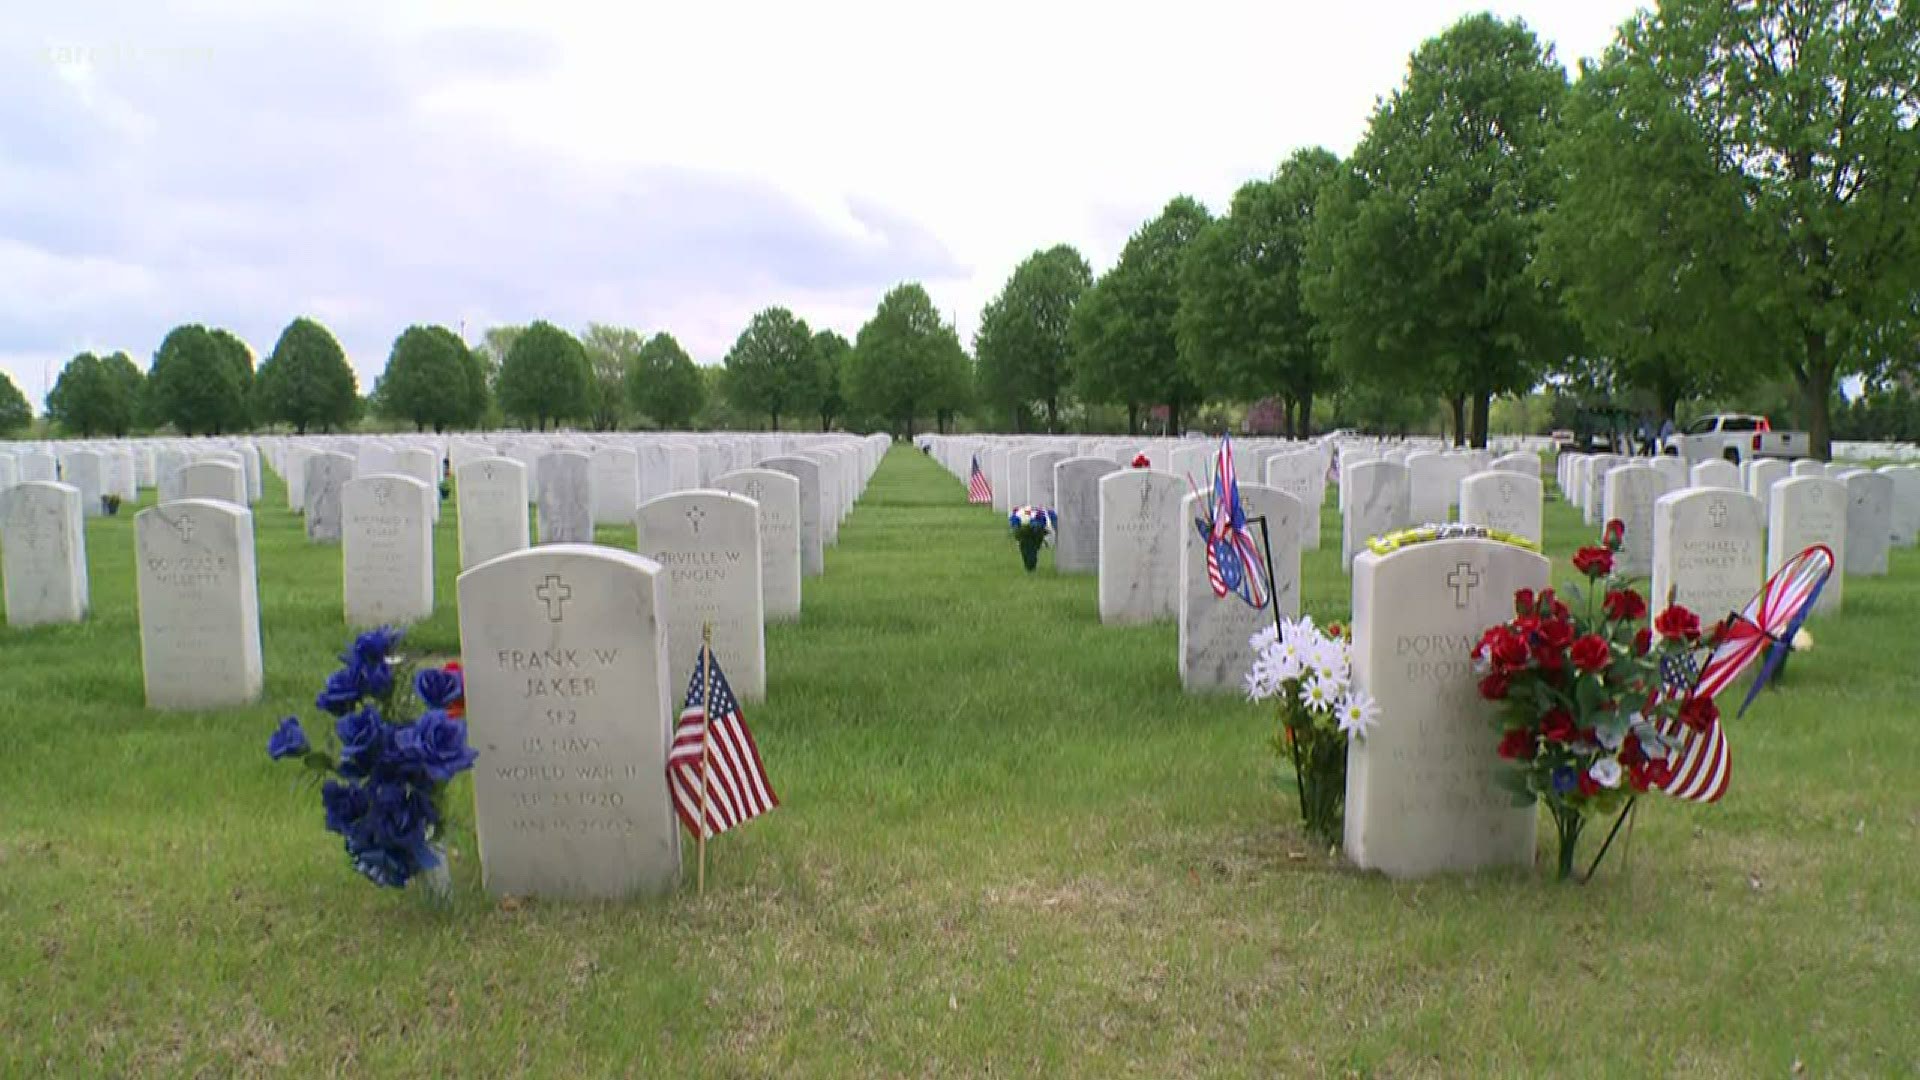 This Memorial Day will look different than years past as many ceremonies and programs will be held online due to the pandemic.